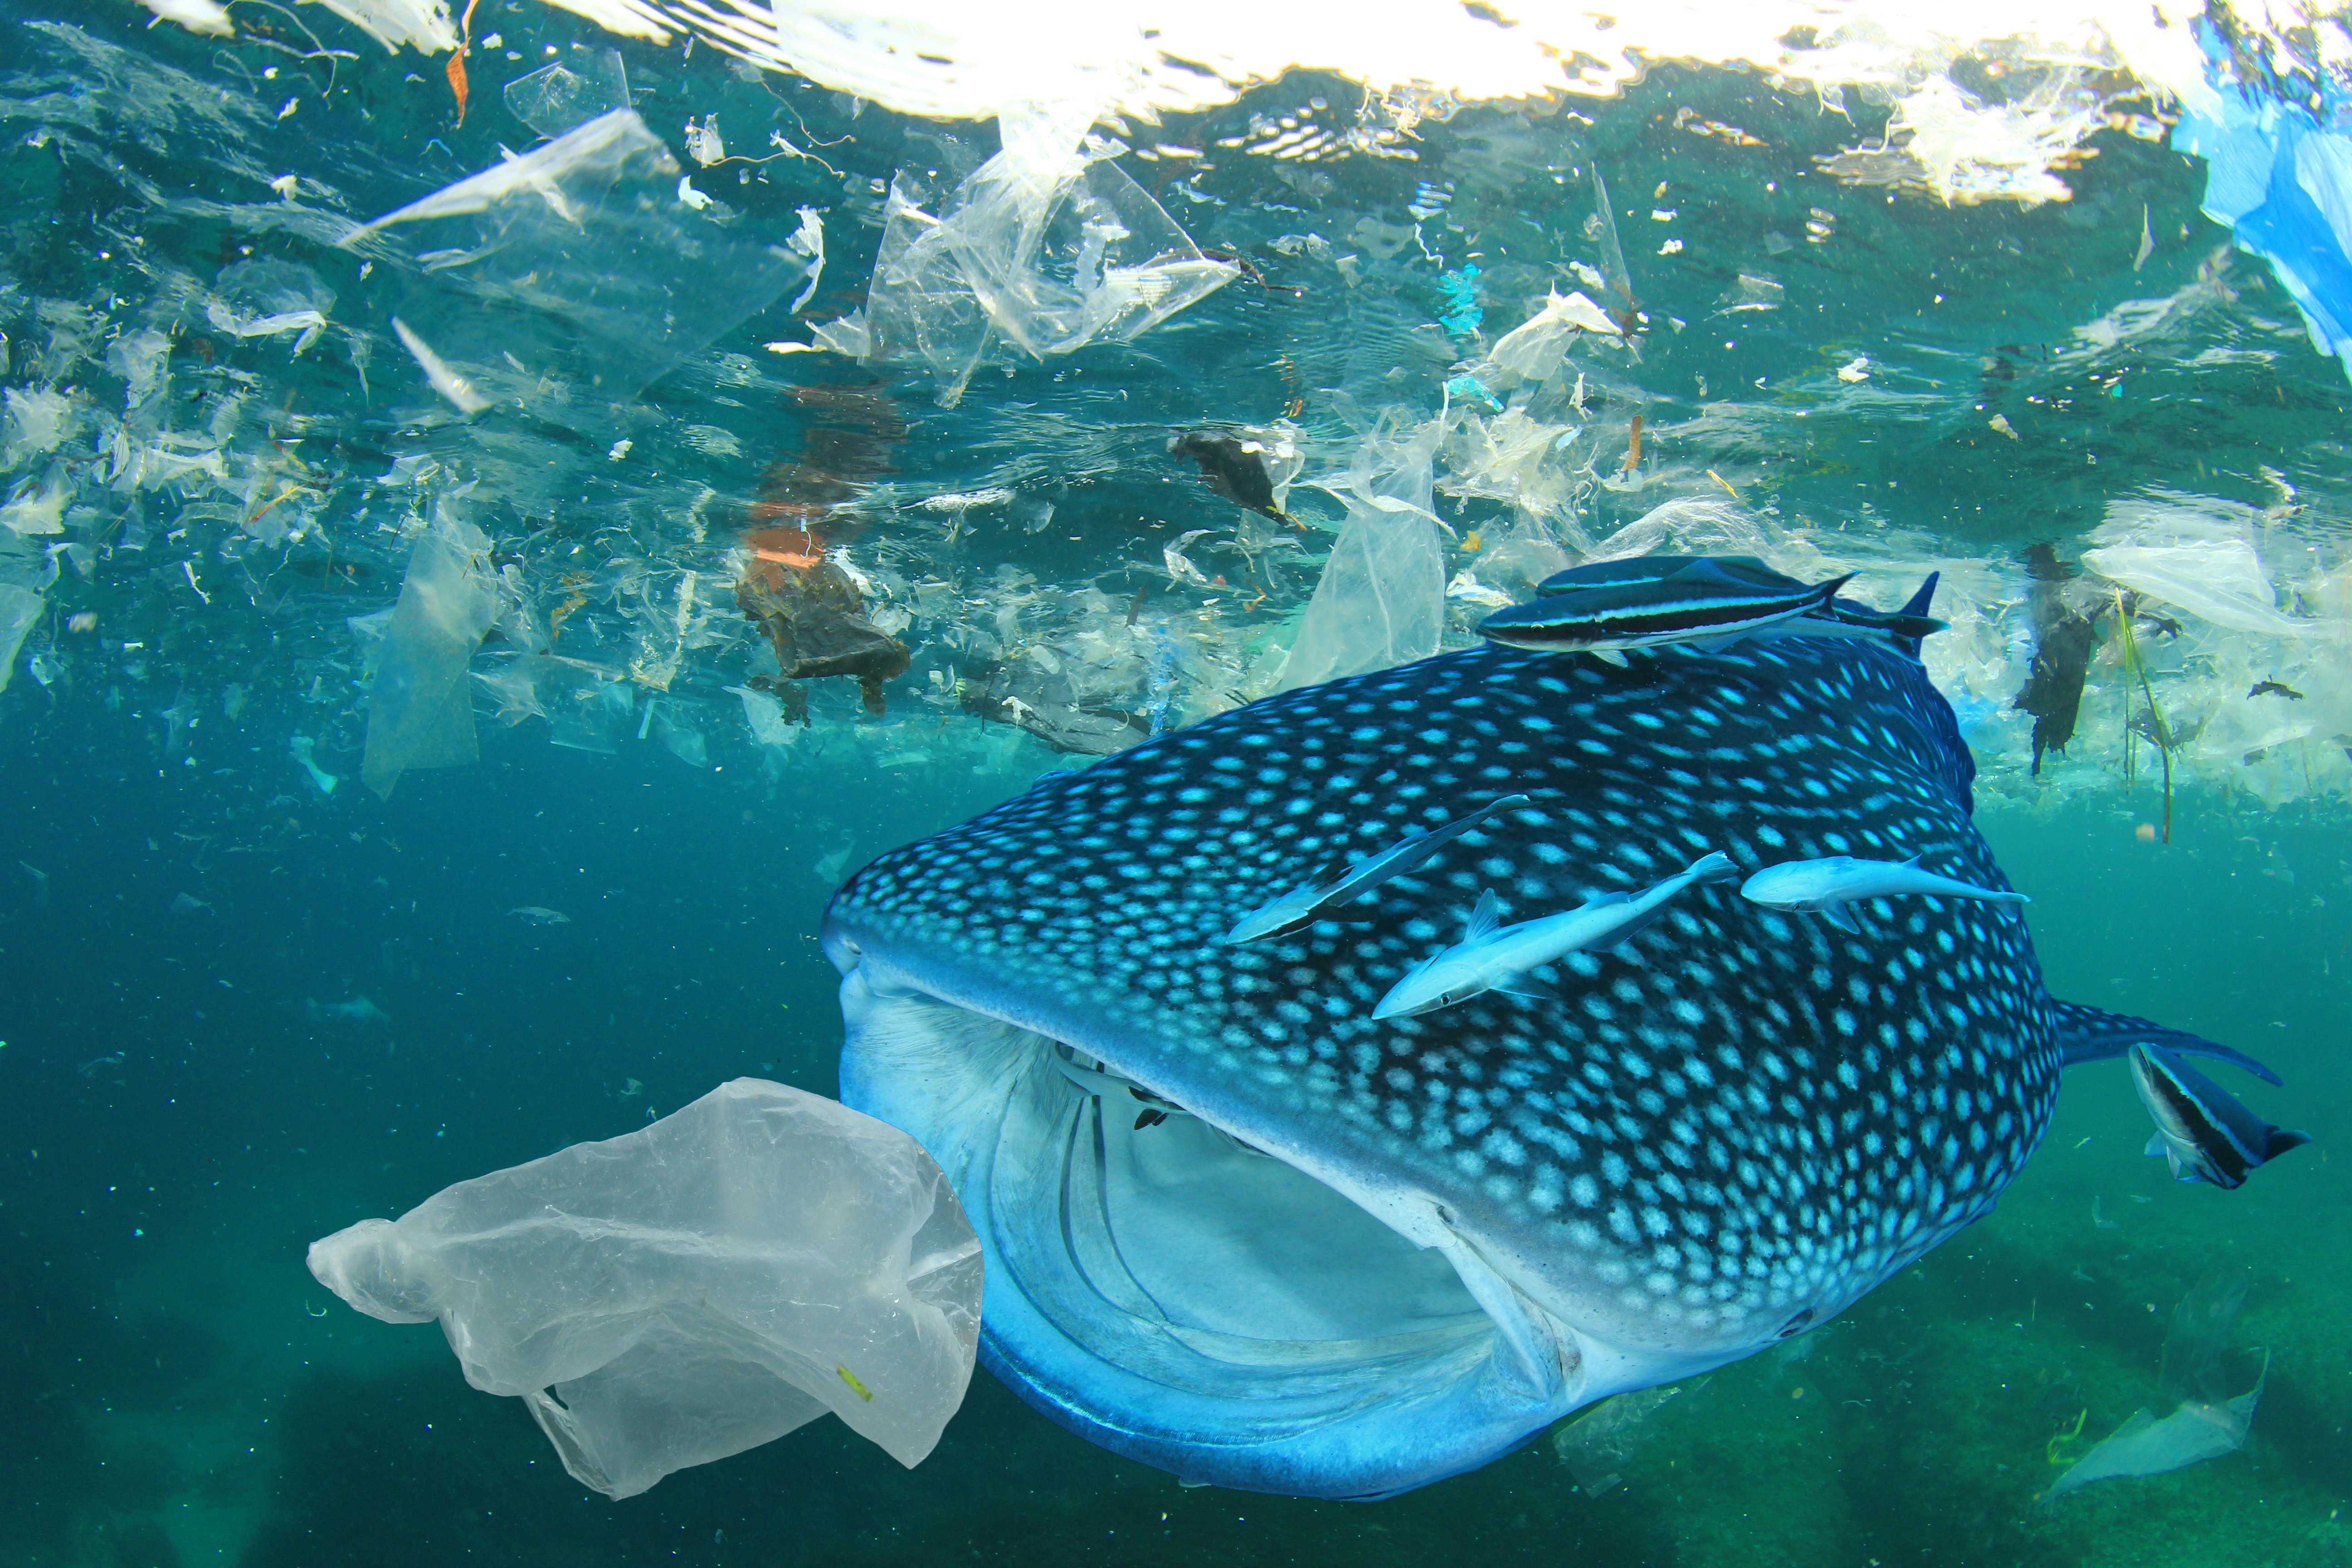 Microplastics are taken up by marine animals at all levels of the food chain, from plankton to large predators.